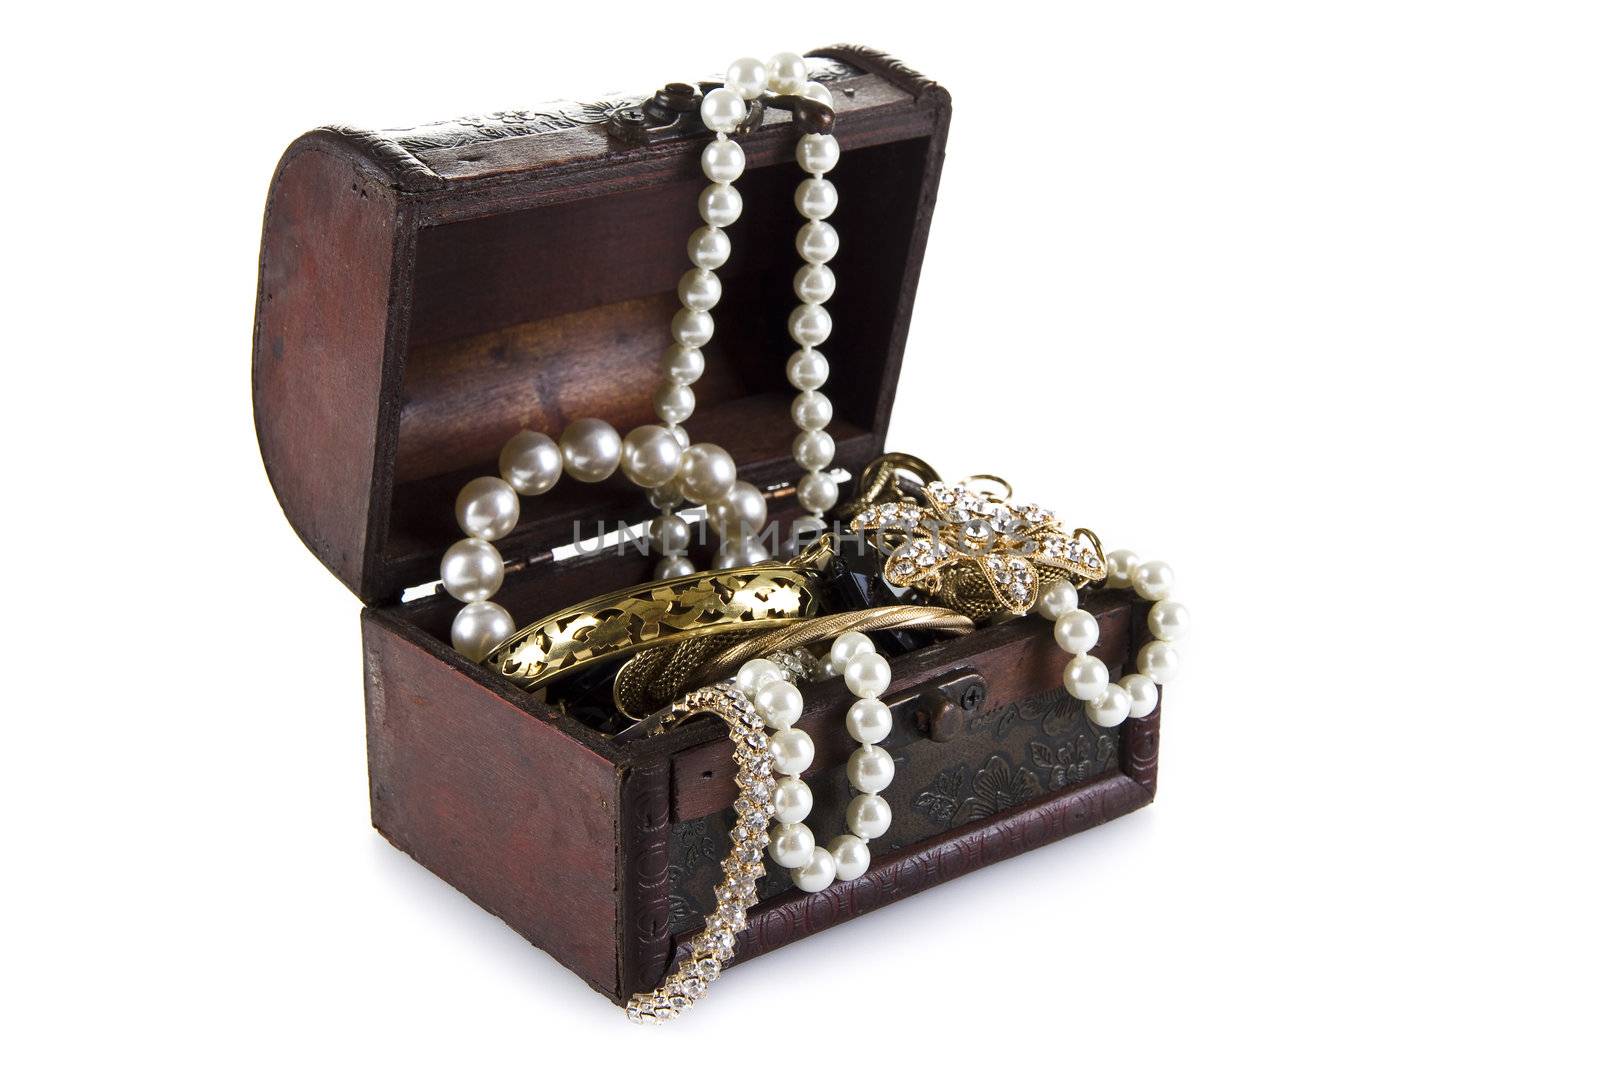 Treasure Chest full of jewelery  isolated over white background